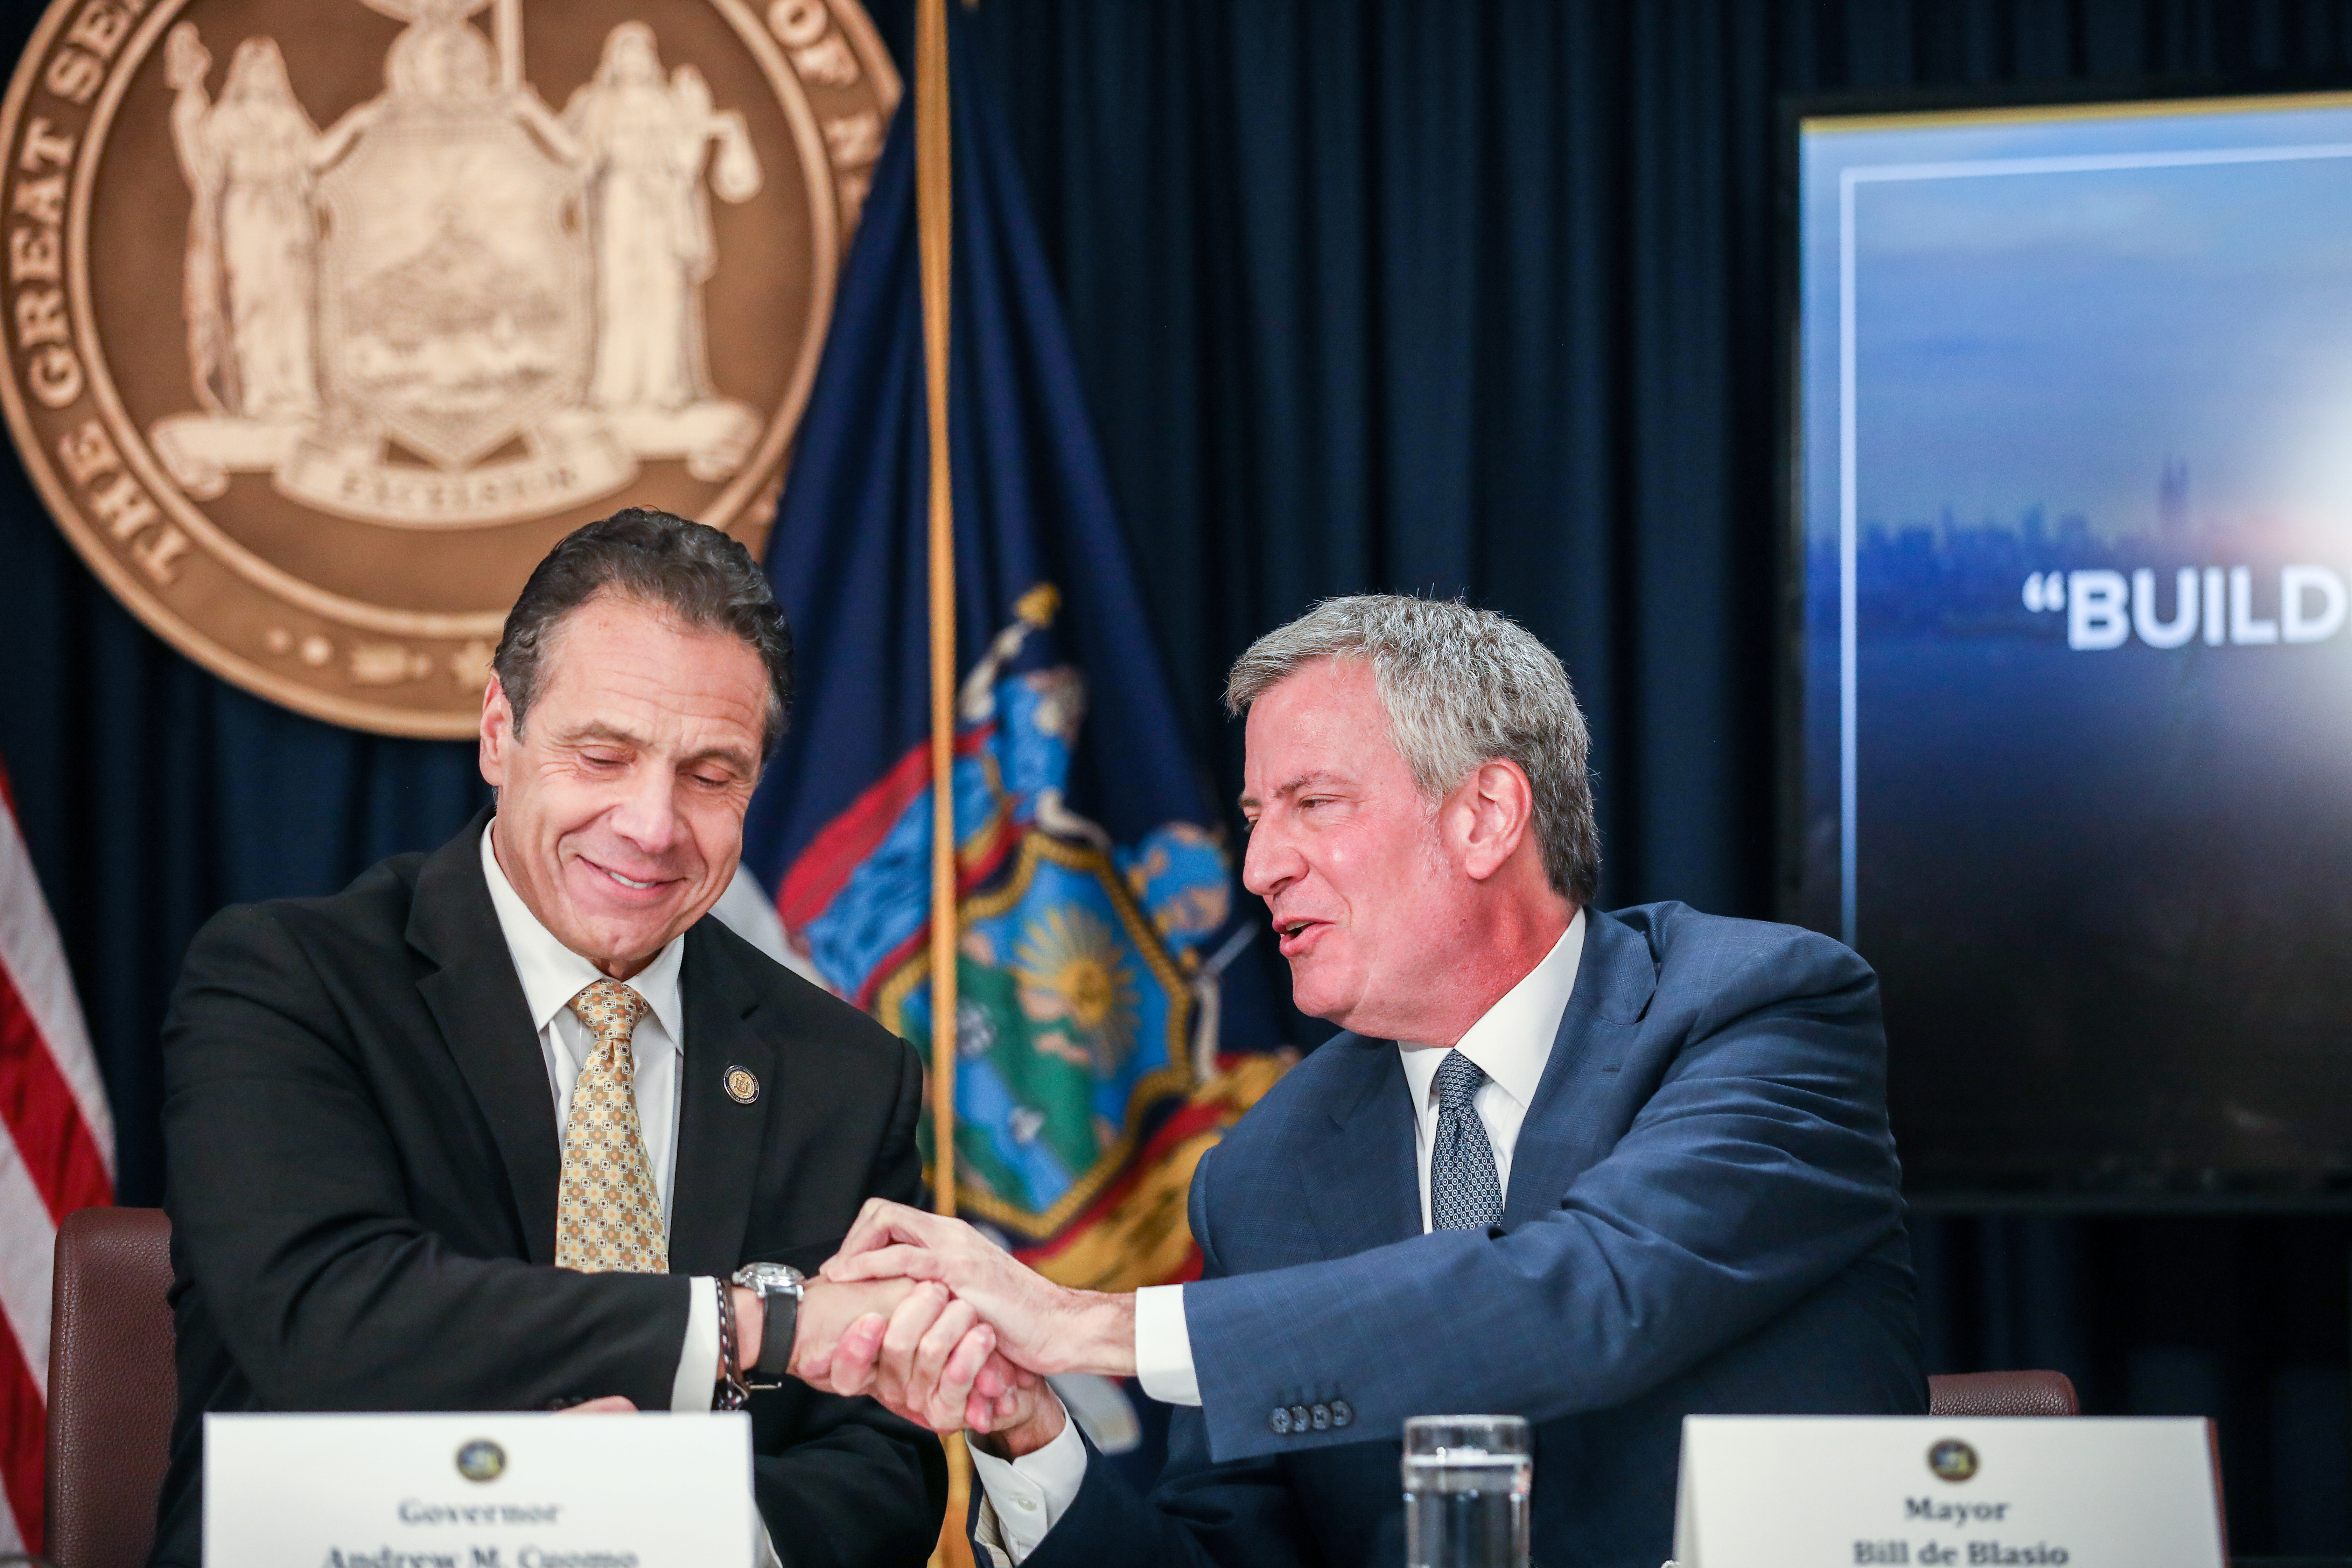 New York Governor Andrew Cuomo and New York Mayor Bill de Blasio speak during a news conference about Amazon's headquarters expansion to Long Island City in the Queens borough of New York, in New York, U.S., November 13, 2018. REUTERS/Jeenah Moon